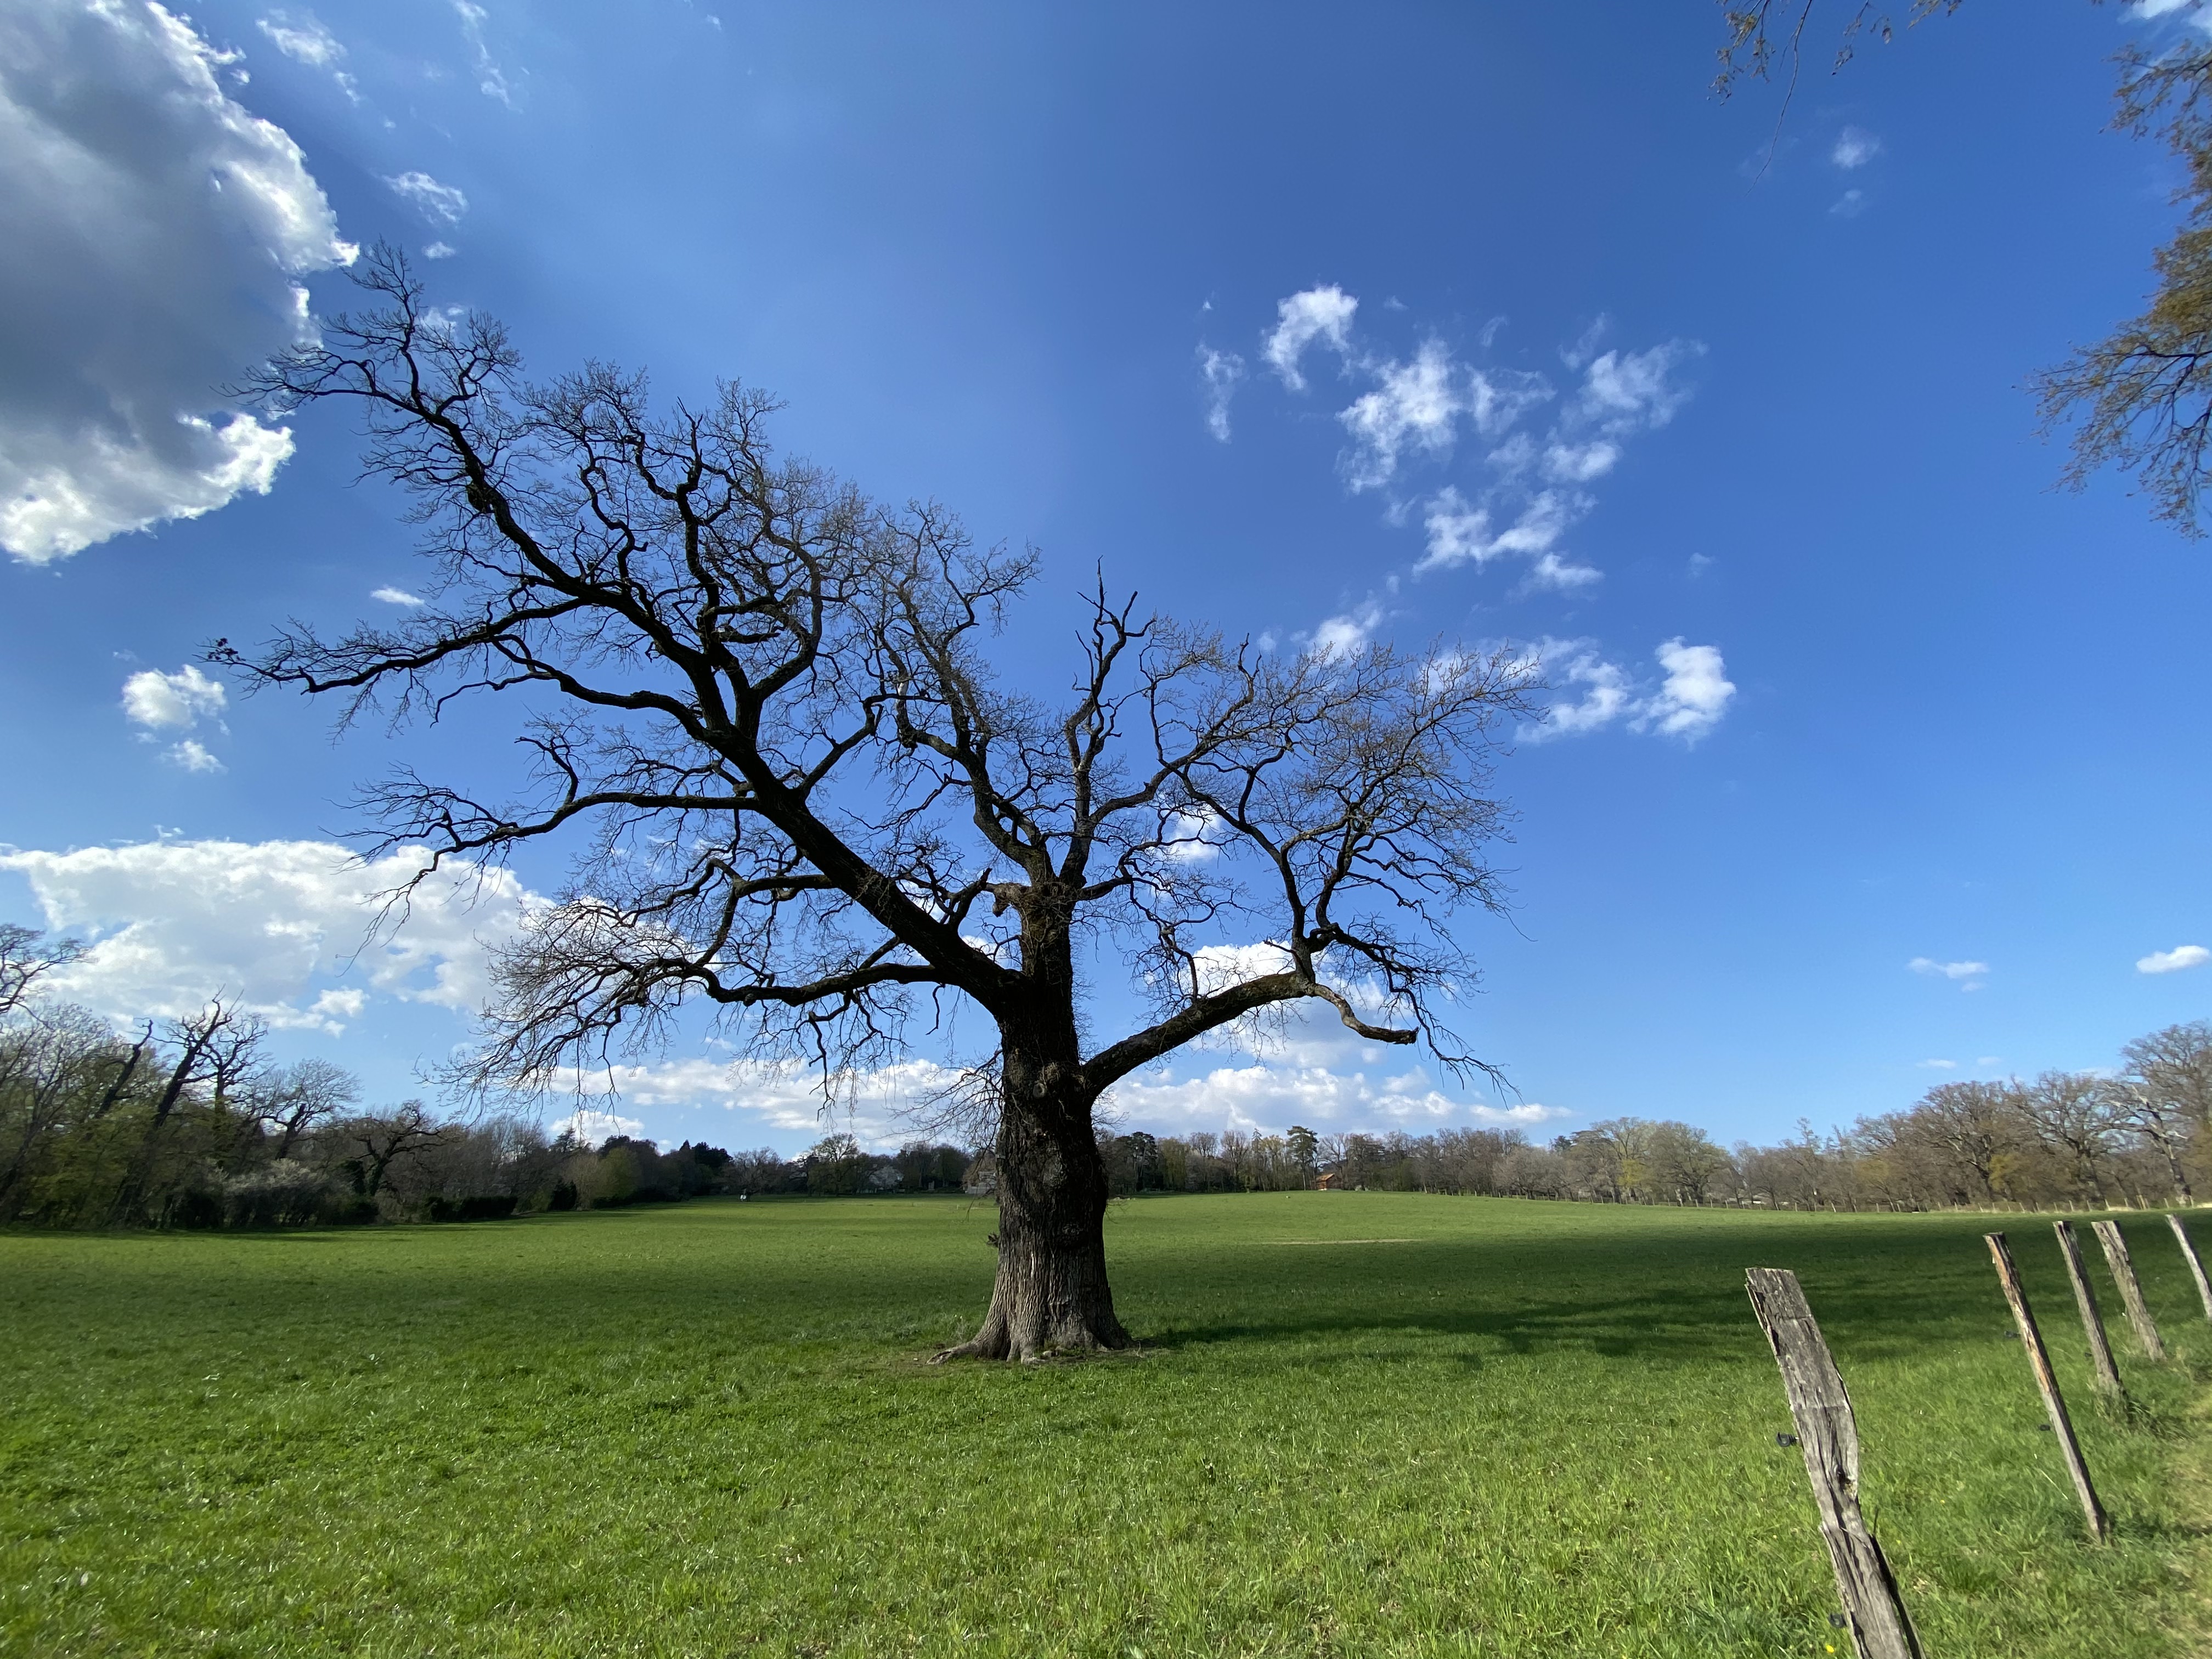 A large tree in a green field spreading its branches over a blue sky